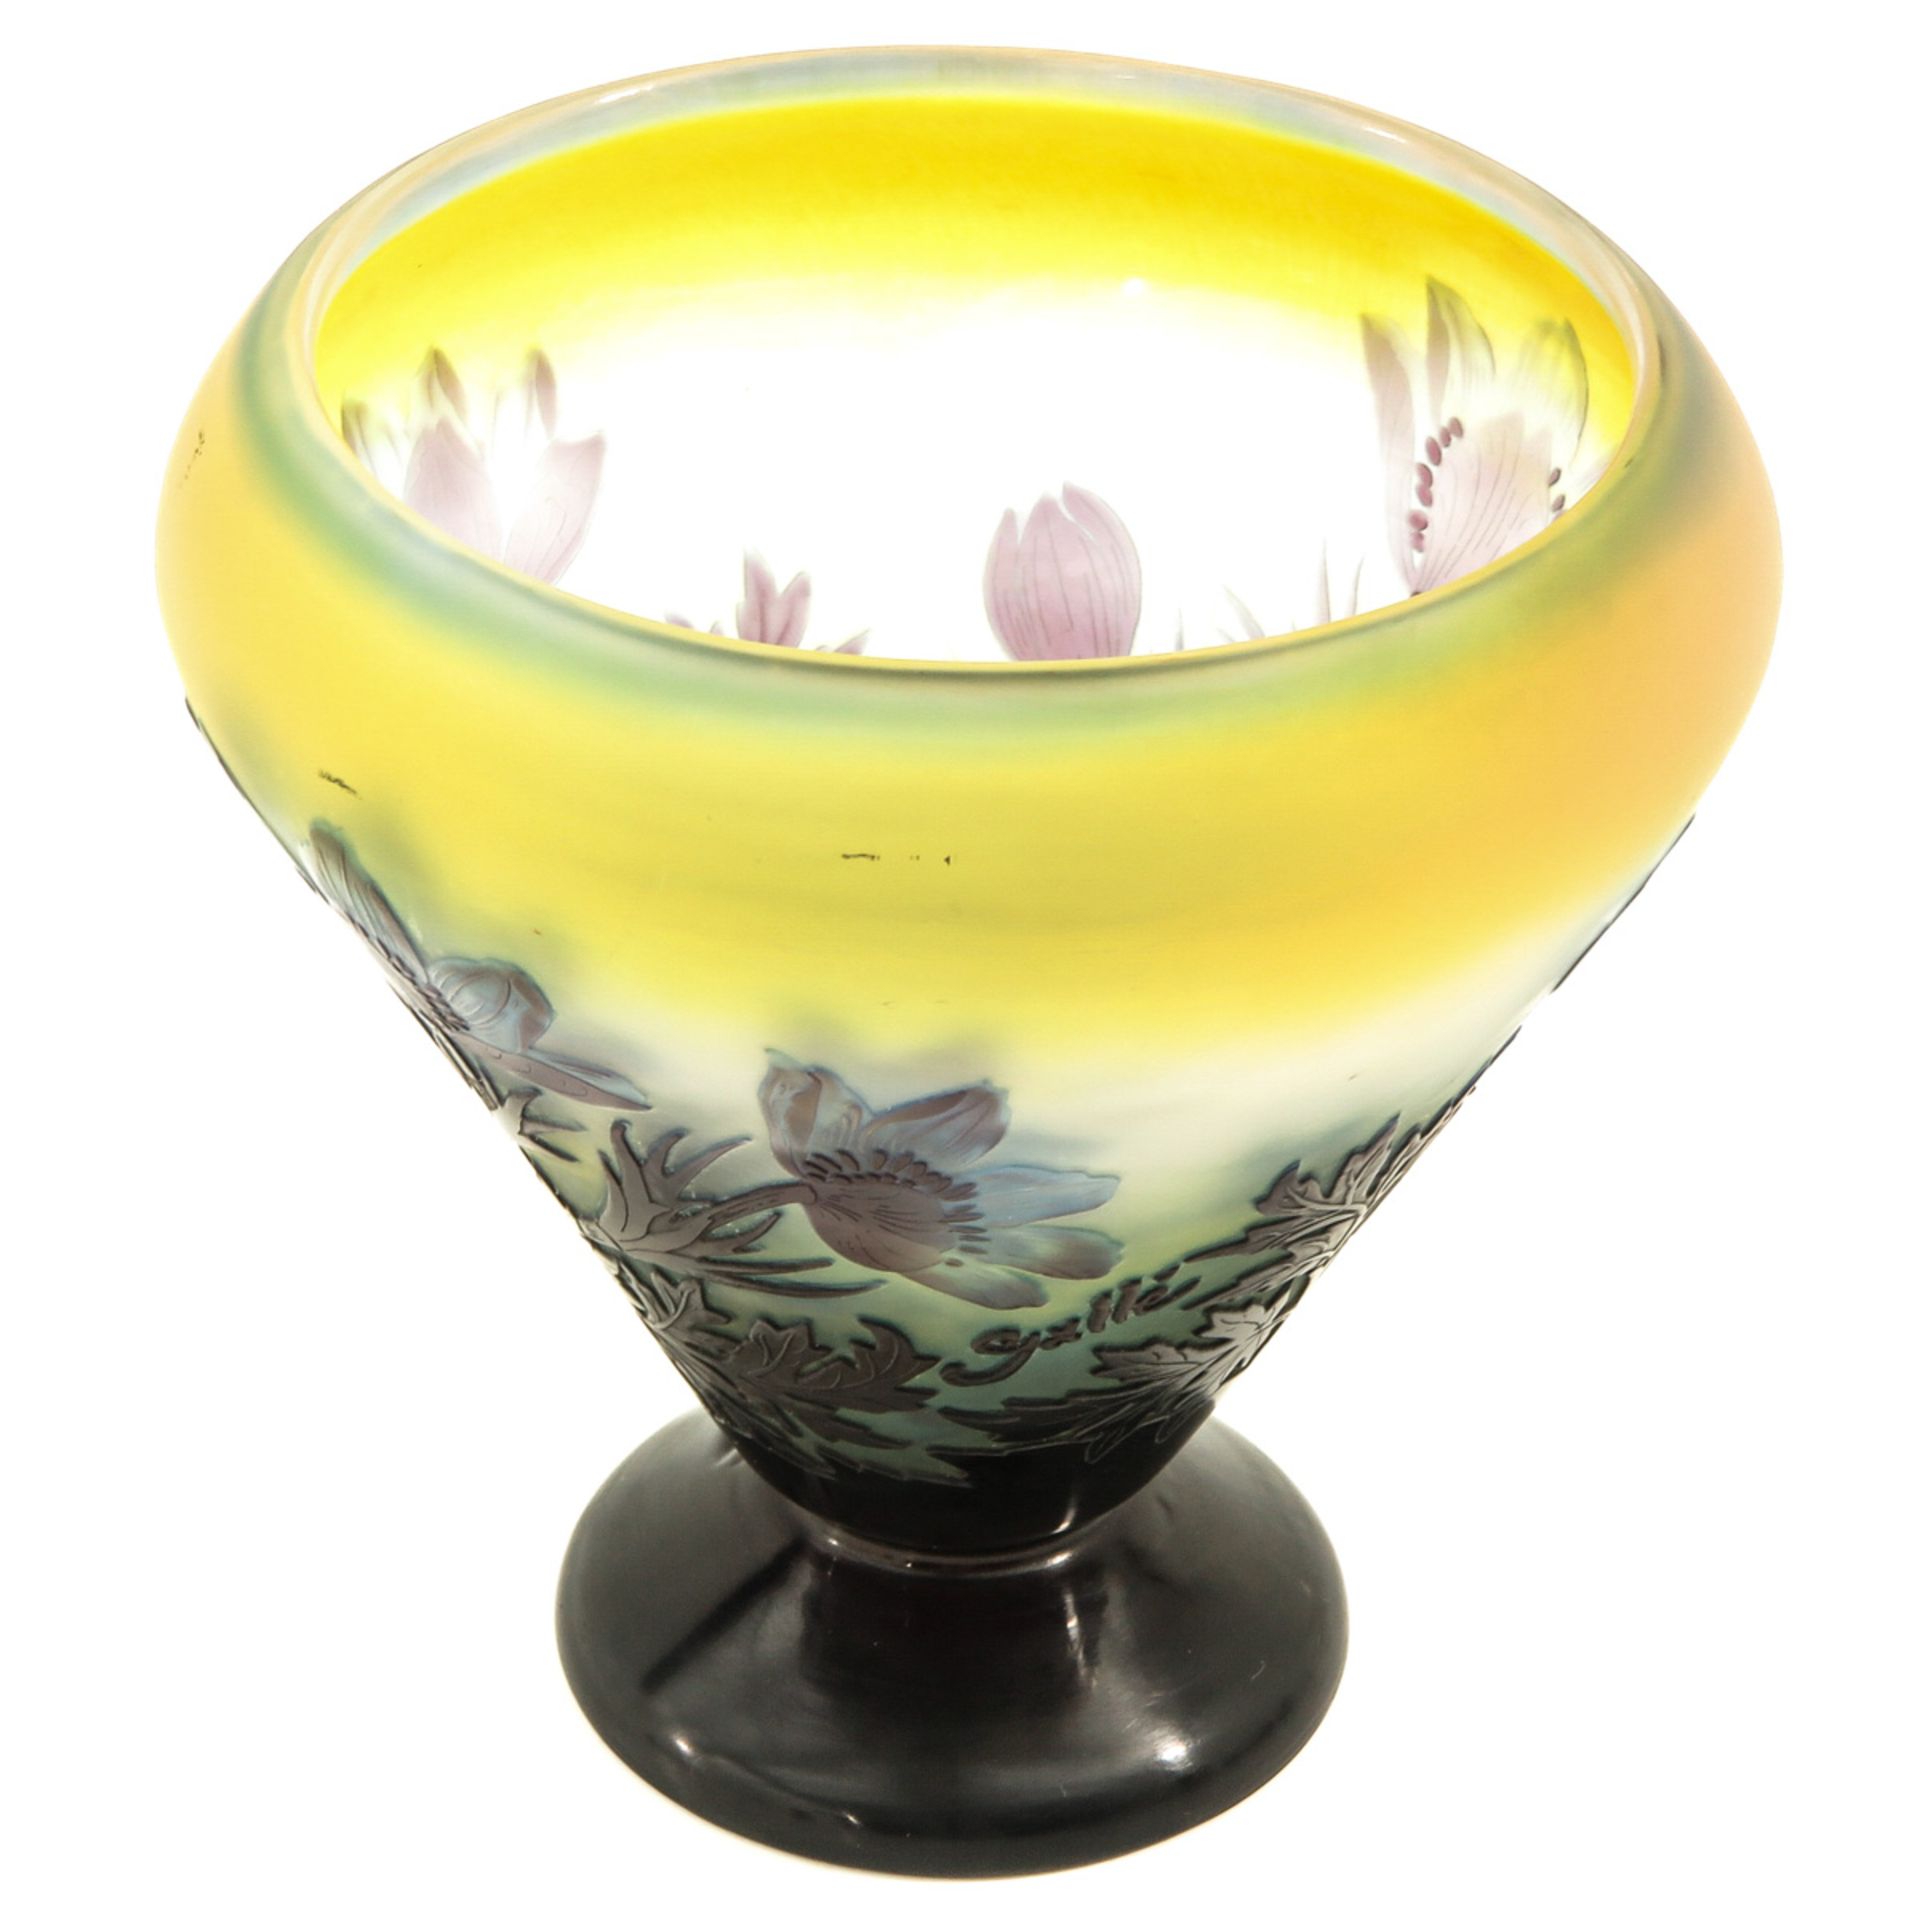 A Signed Galle Vase - Image 8 of 8